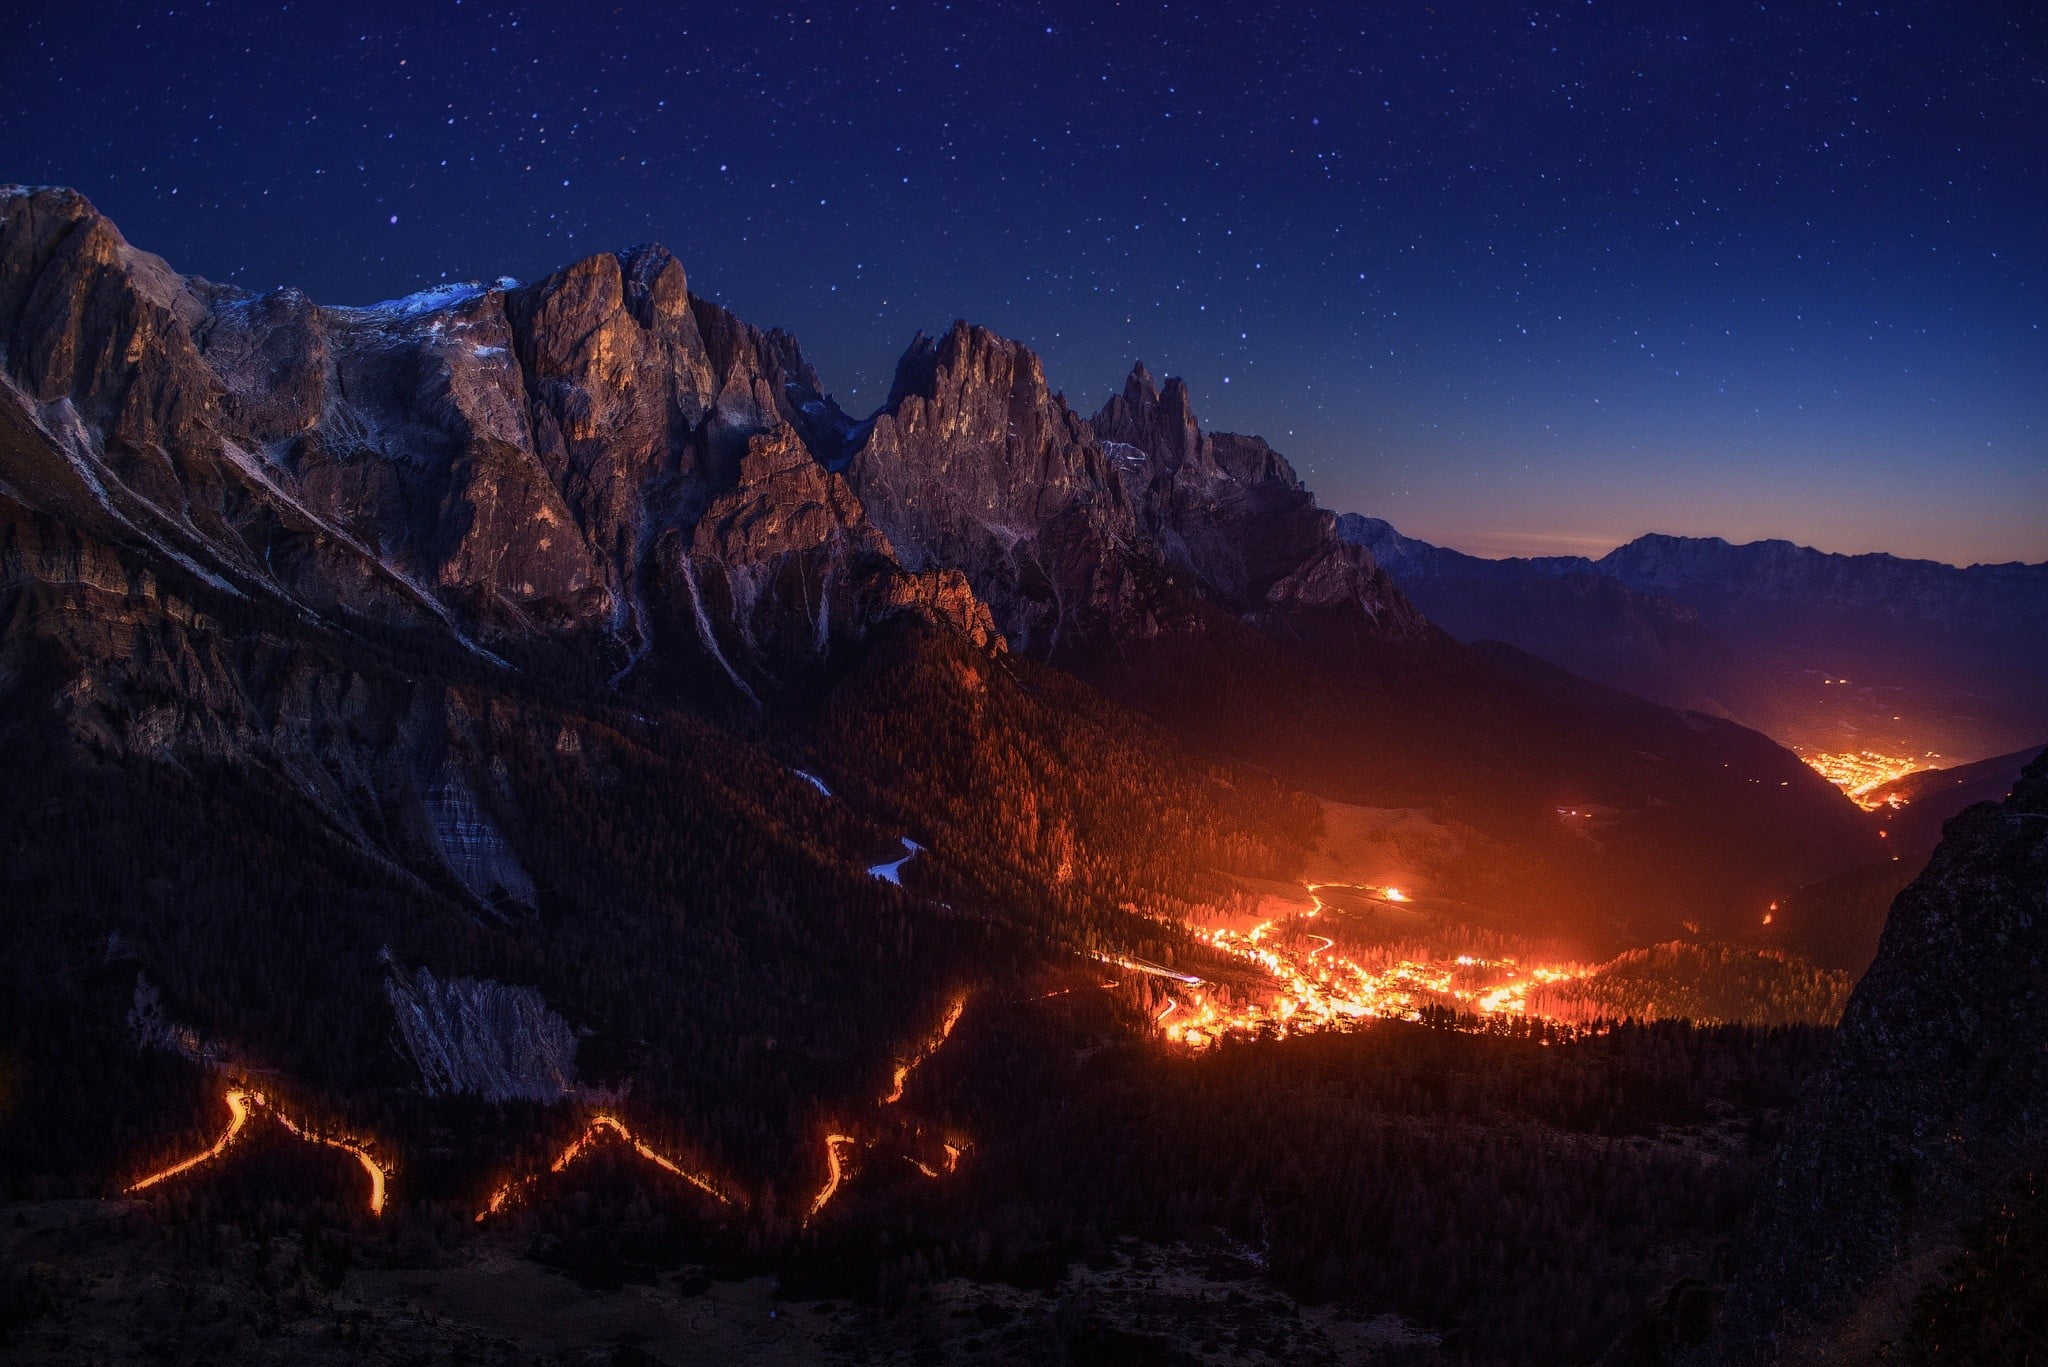 mountain with flowing lava, fire, stars, sky, night